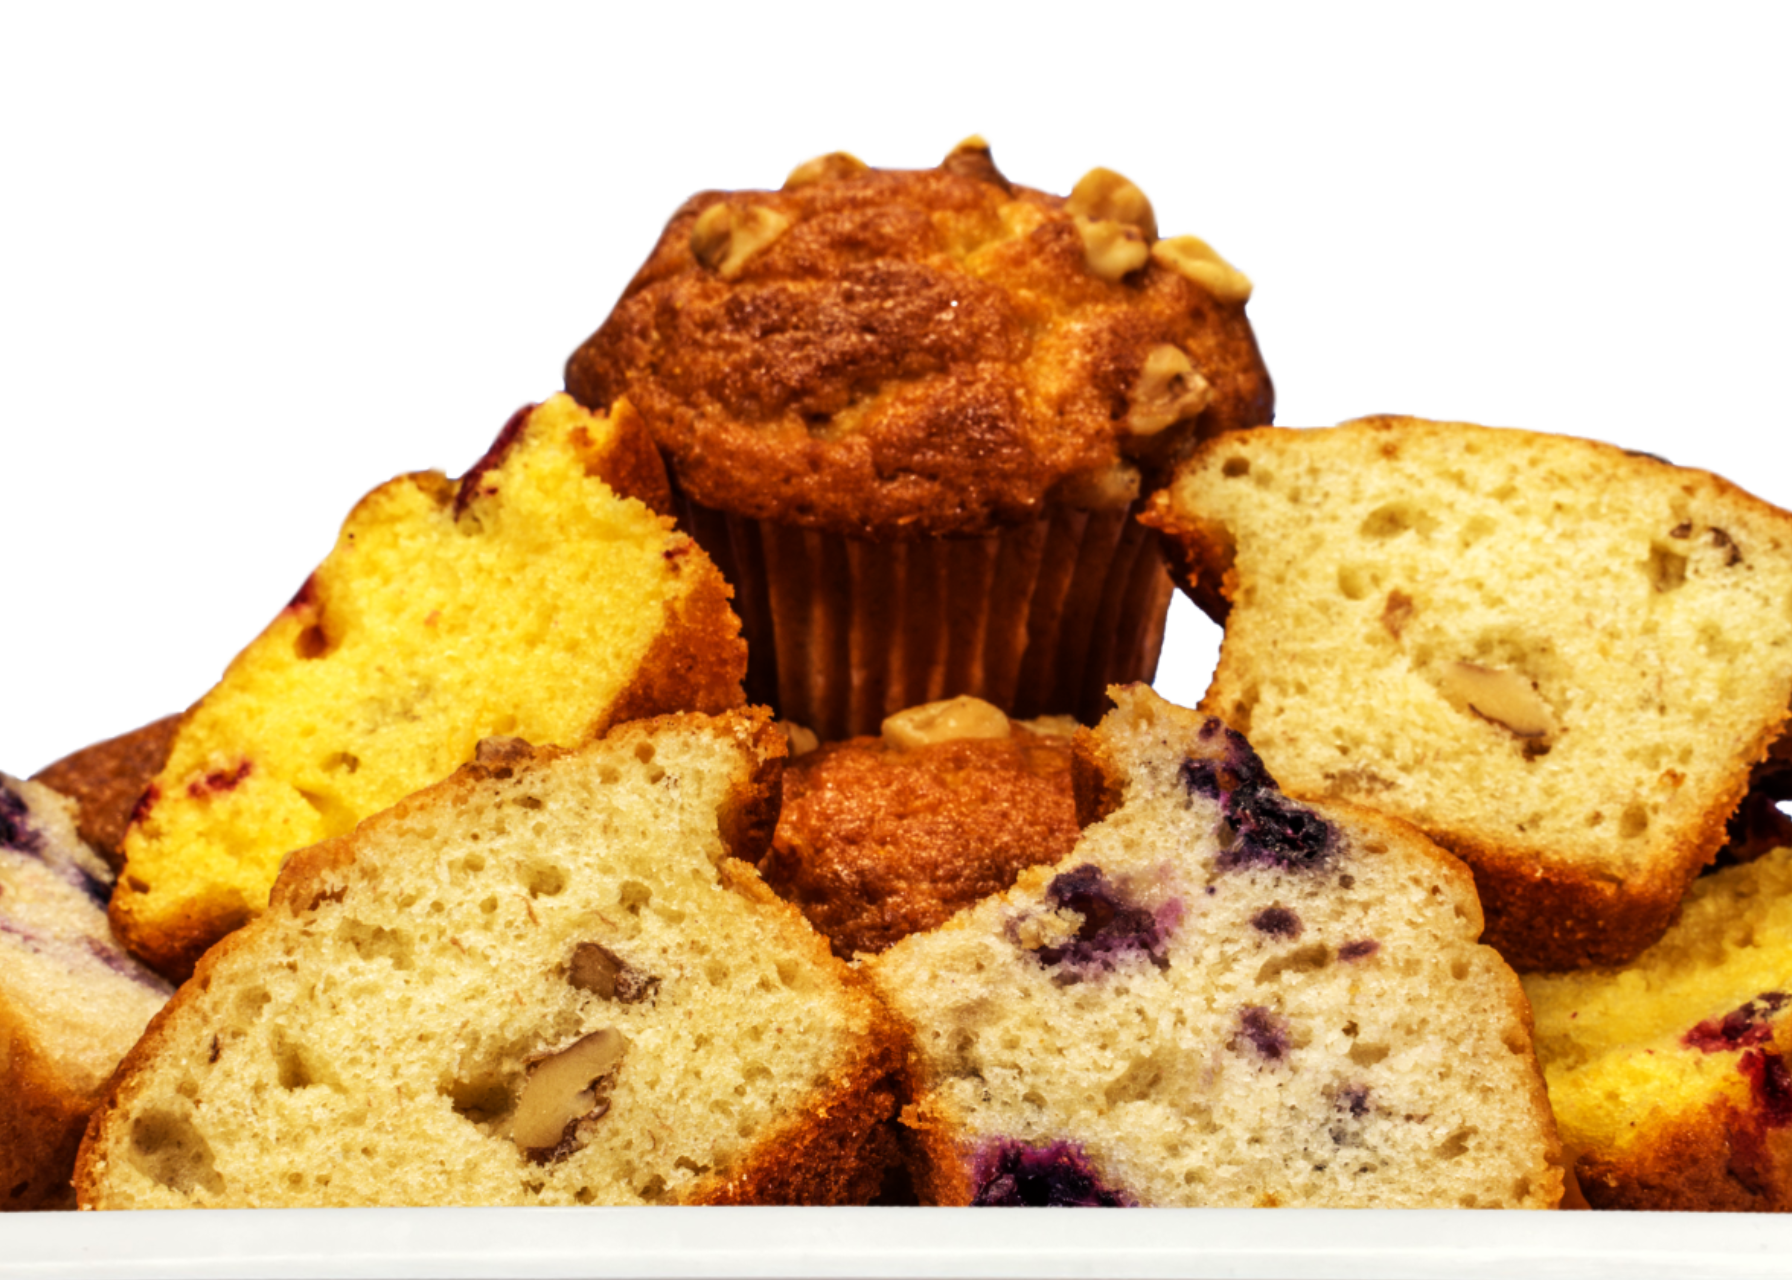 Assorted Muffins Fresh Baked-EventCateringHouston.com